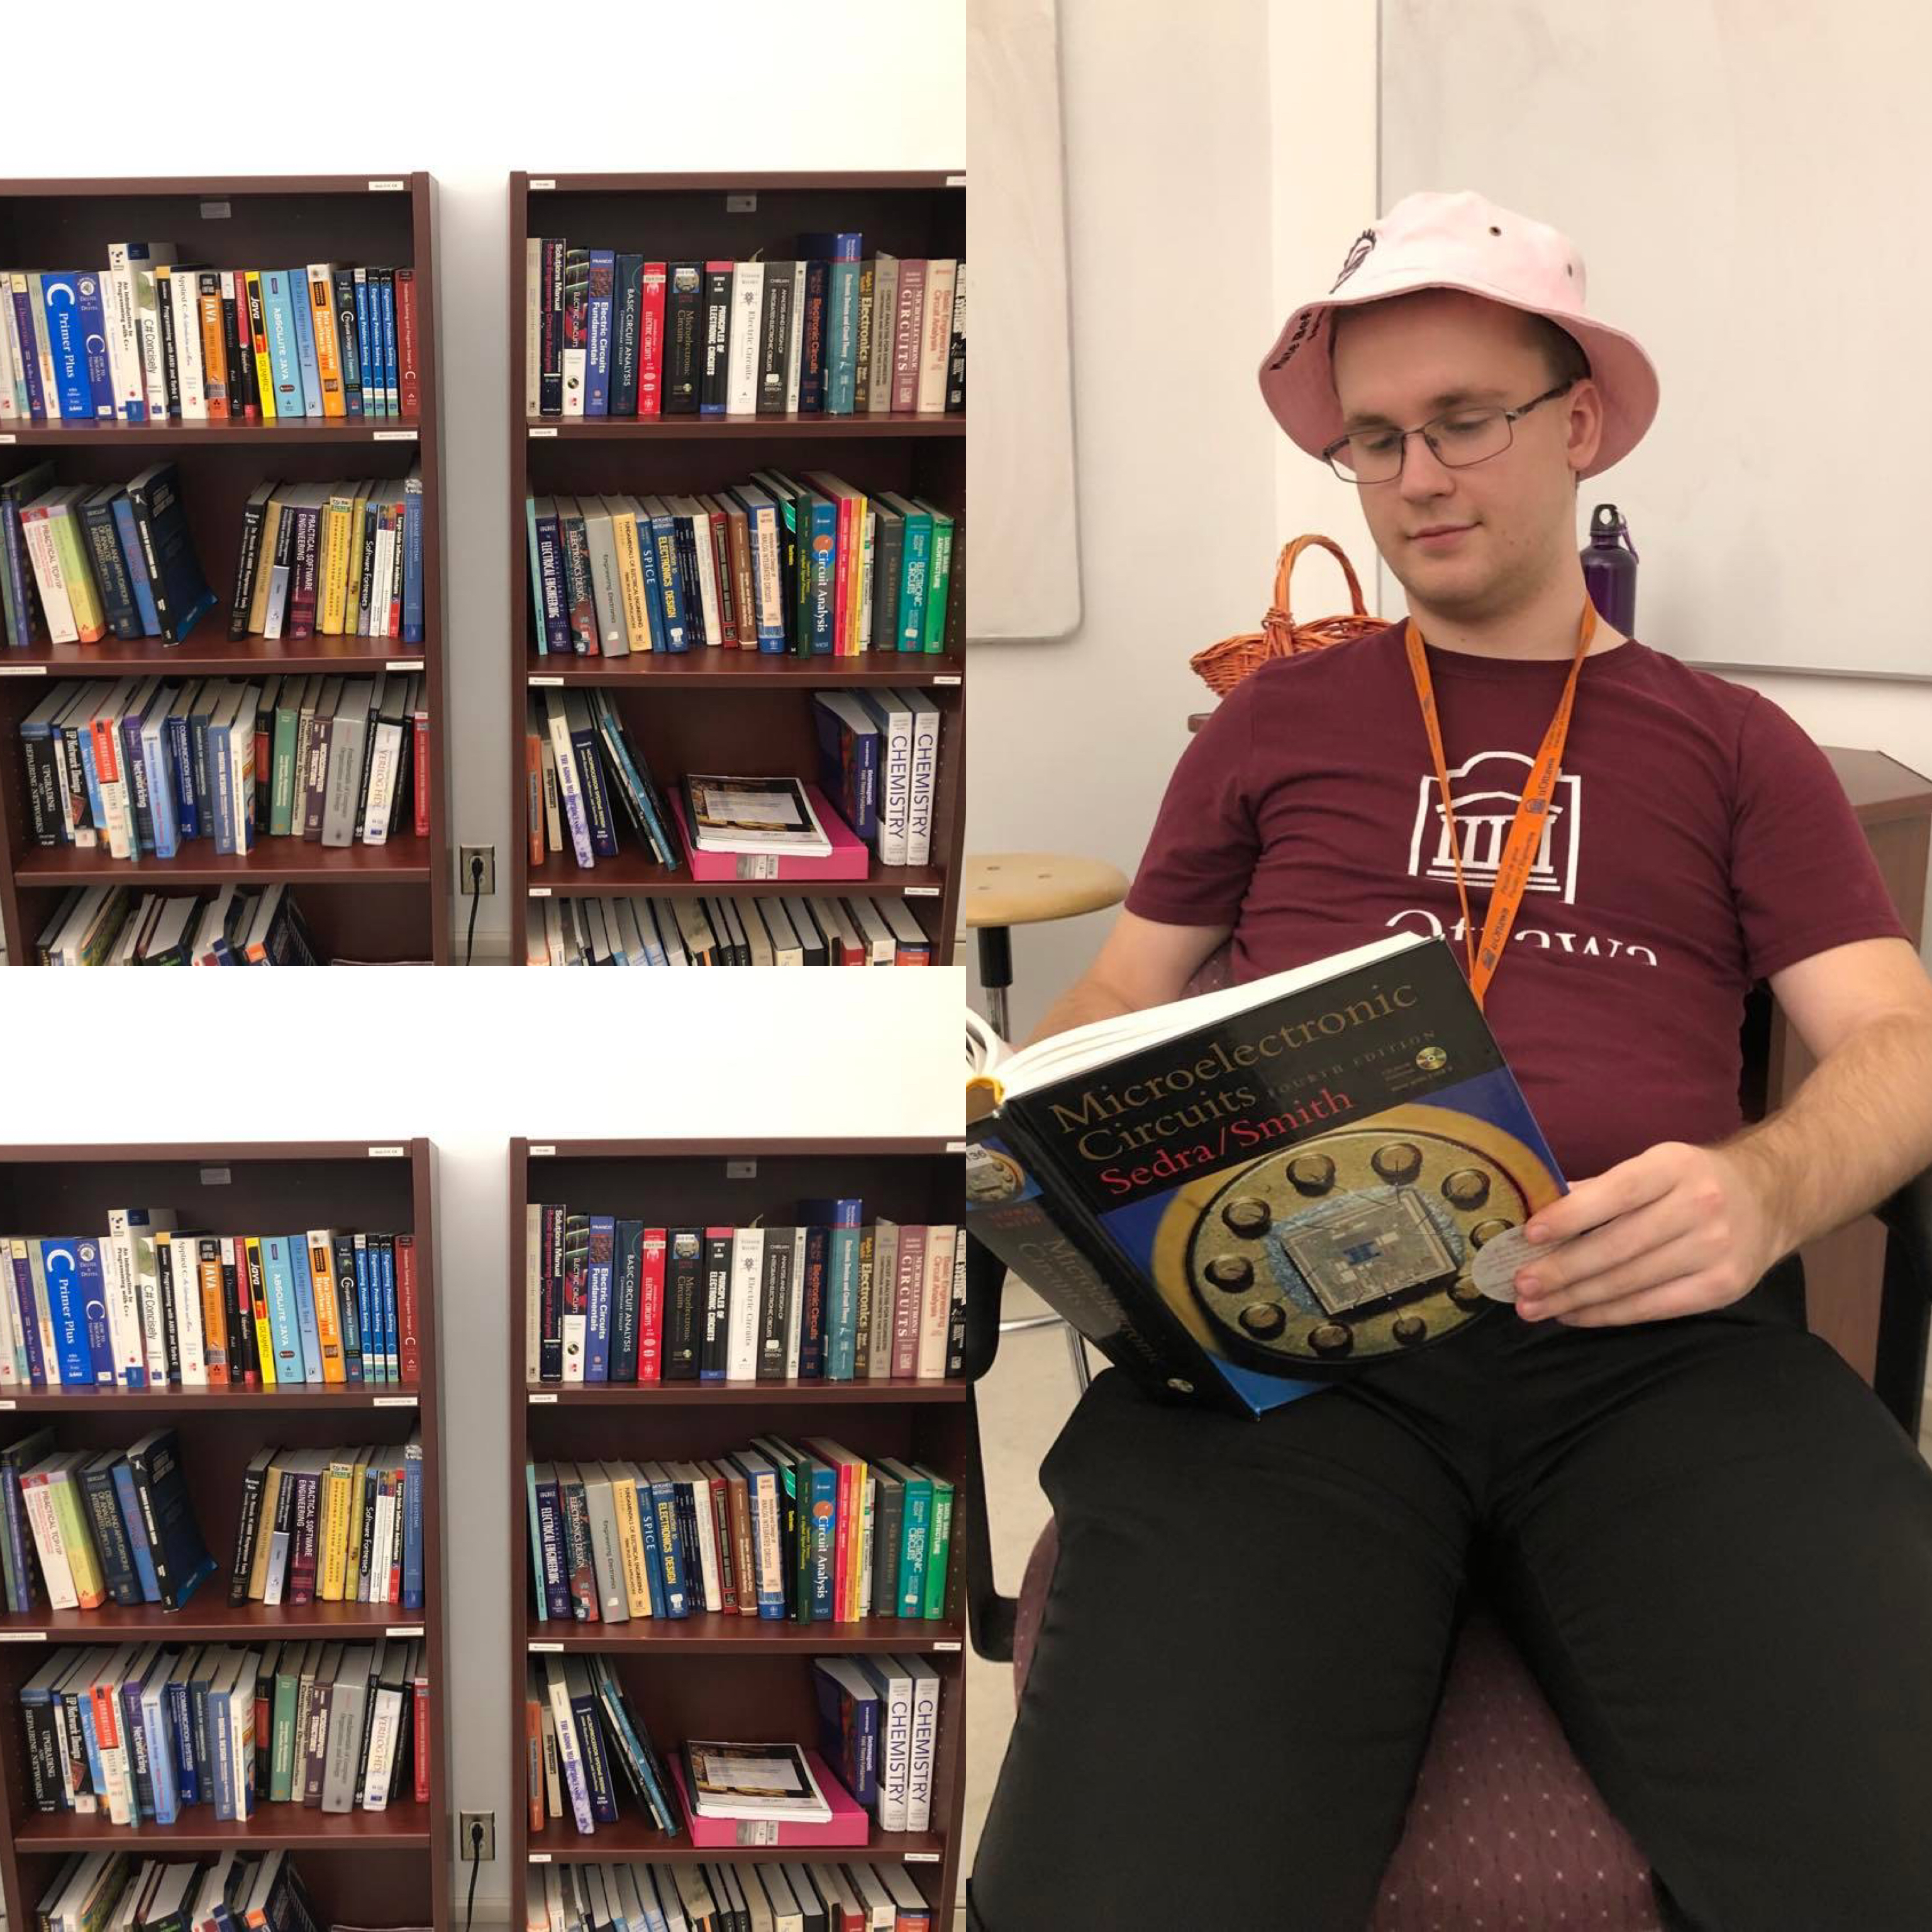 Collage of 3 pictures showing library and someone enjoying a textbook read